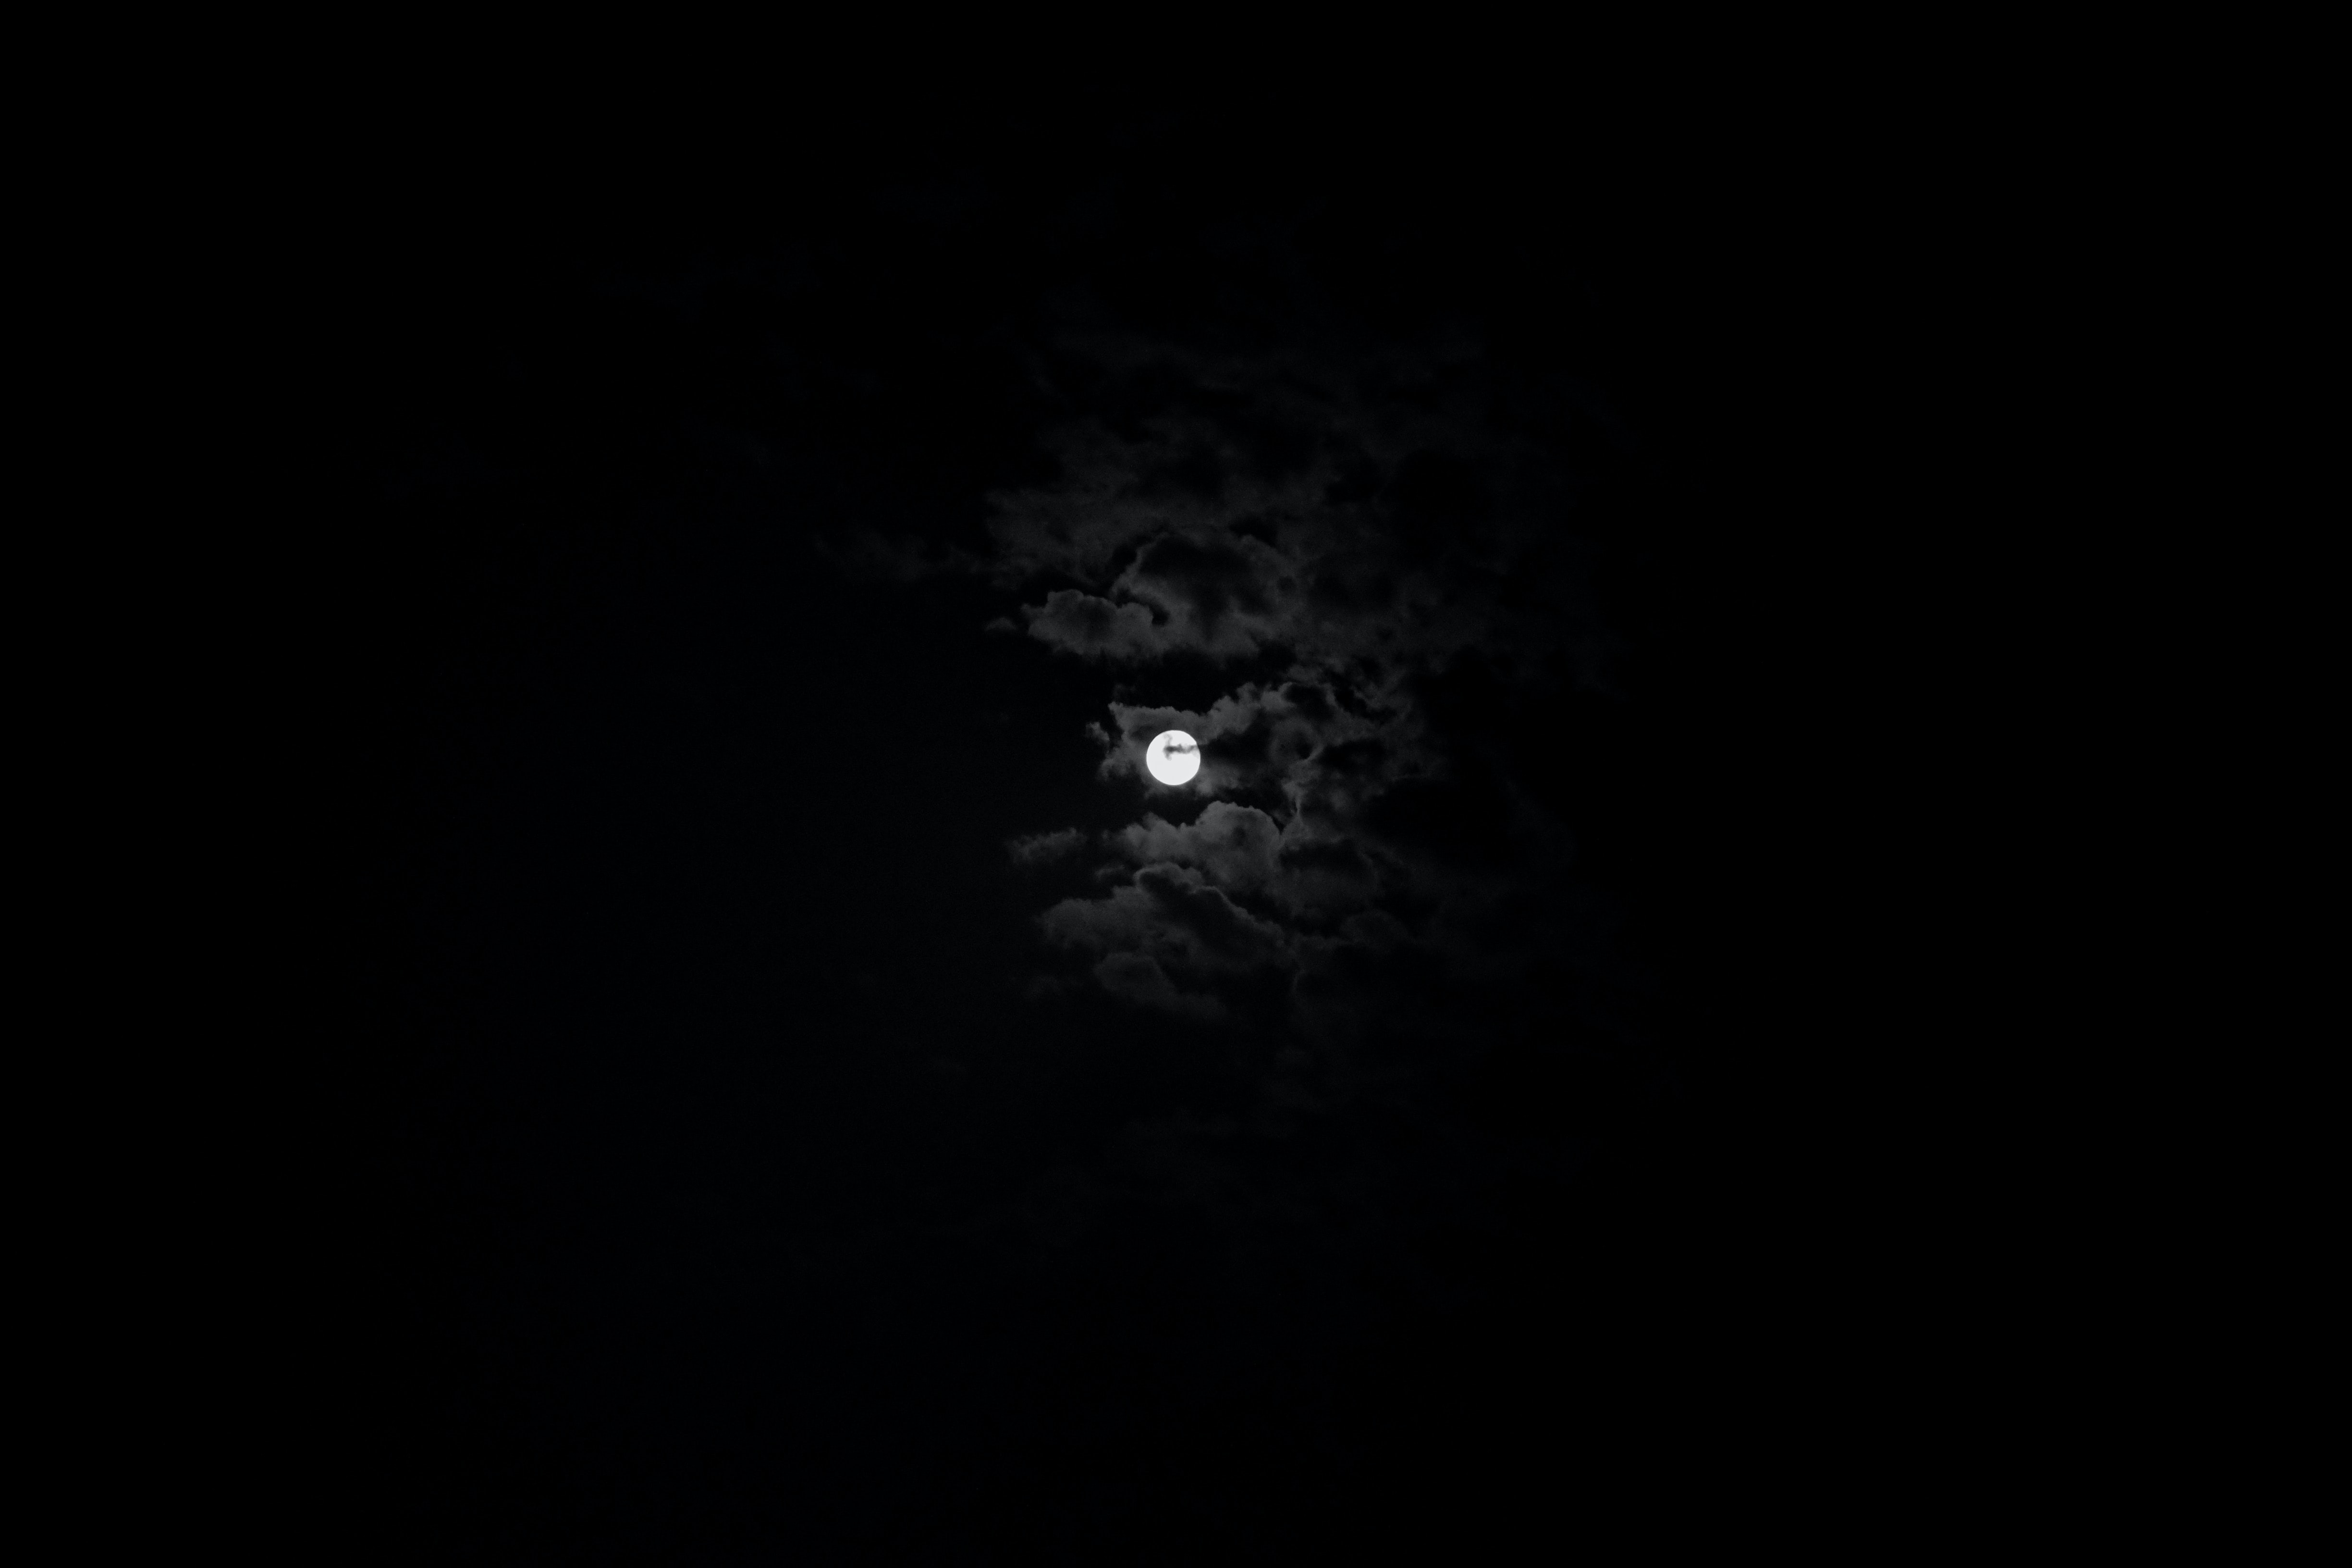 moon, black, black and white, sky, night, clouds 8K